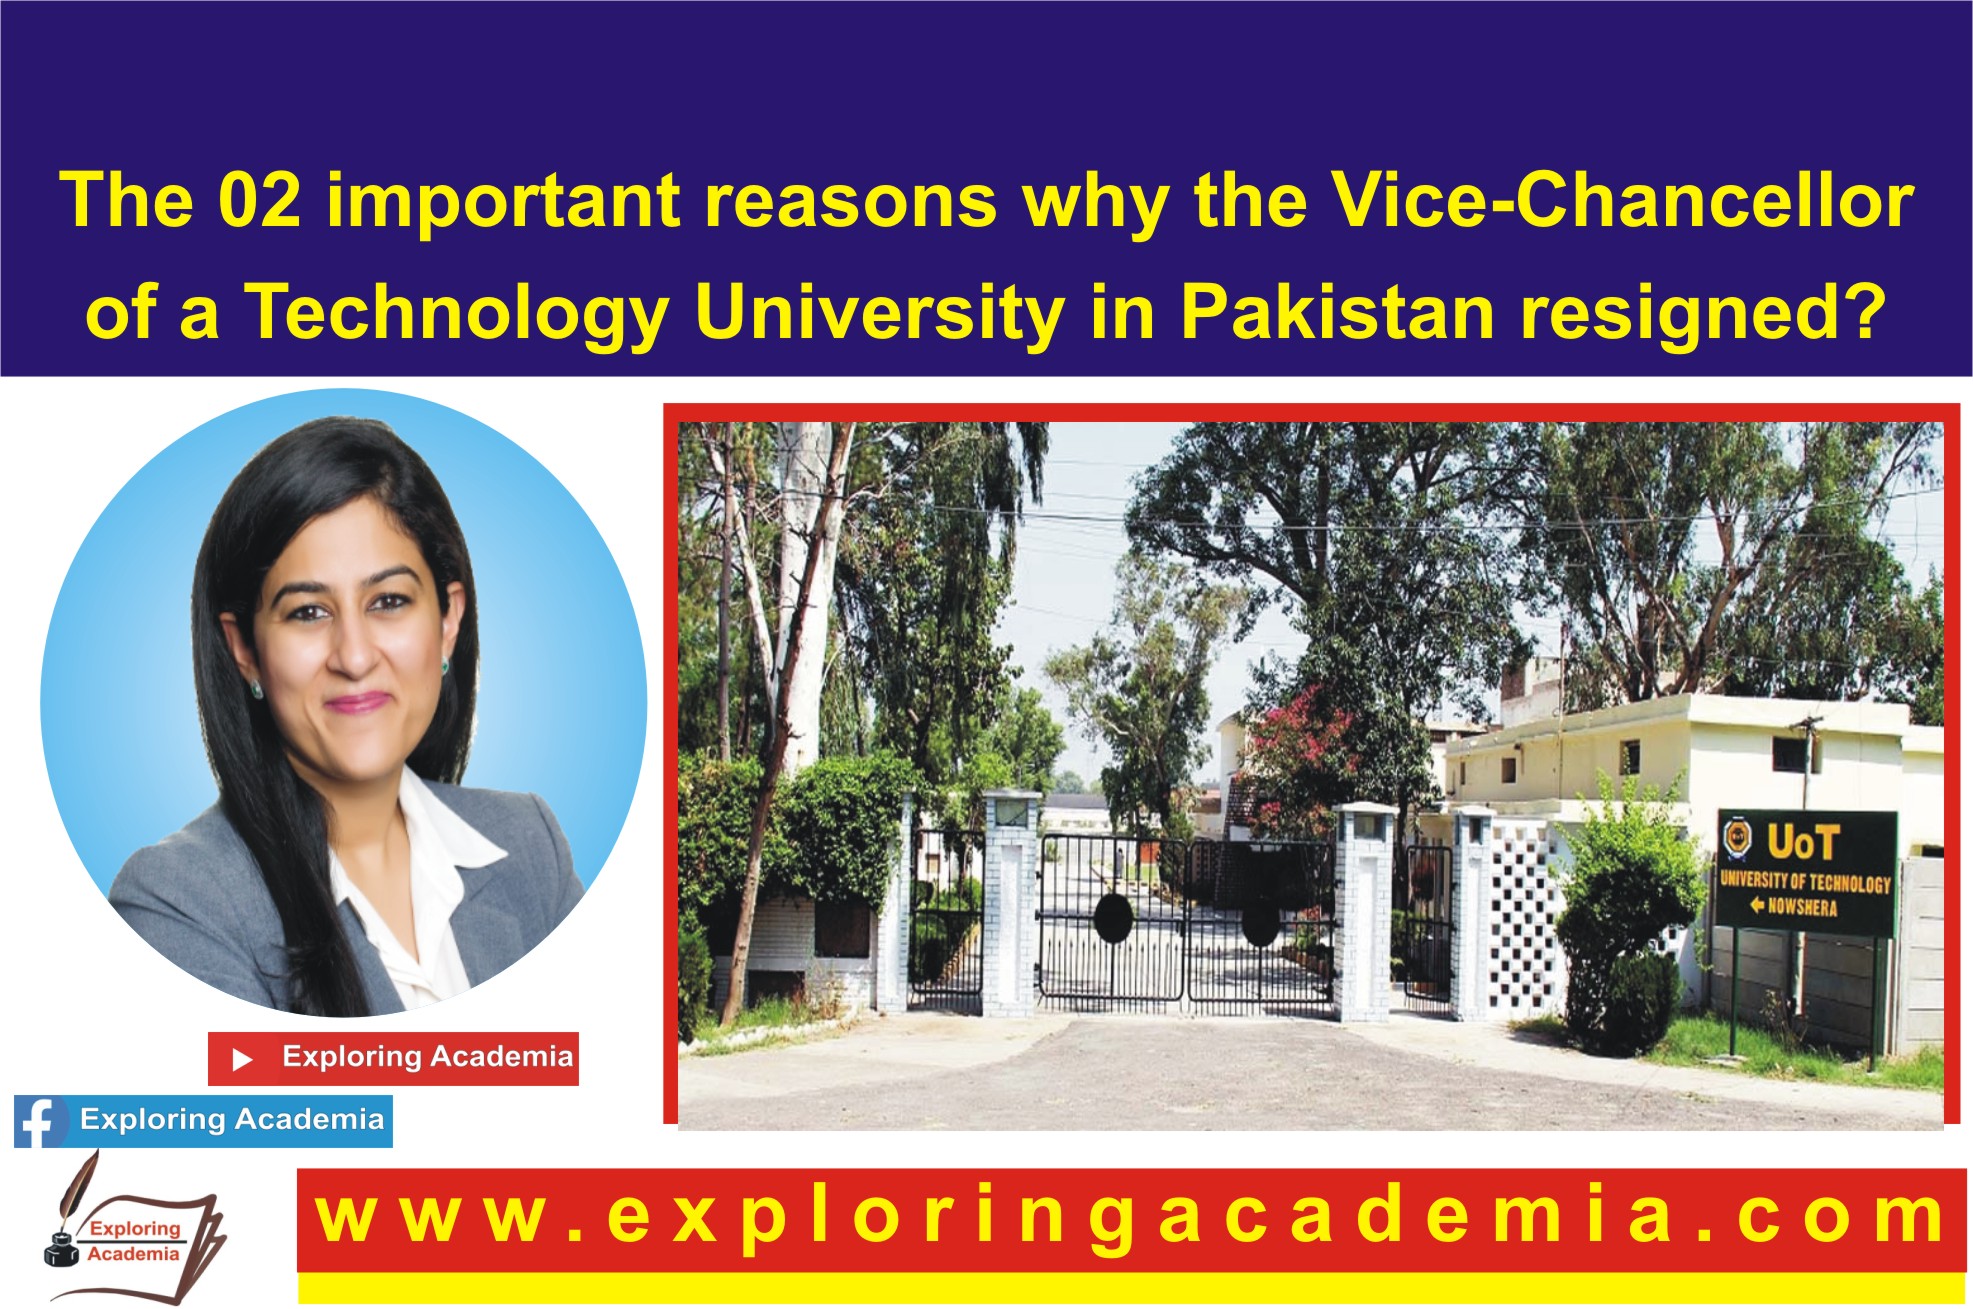 The 02 important reasons why the Vice-Chancellor of a Technology University resigned?